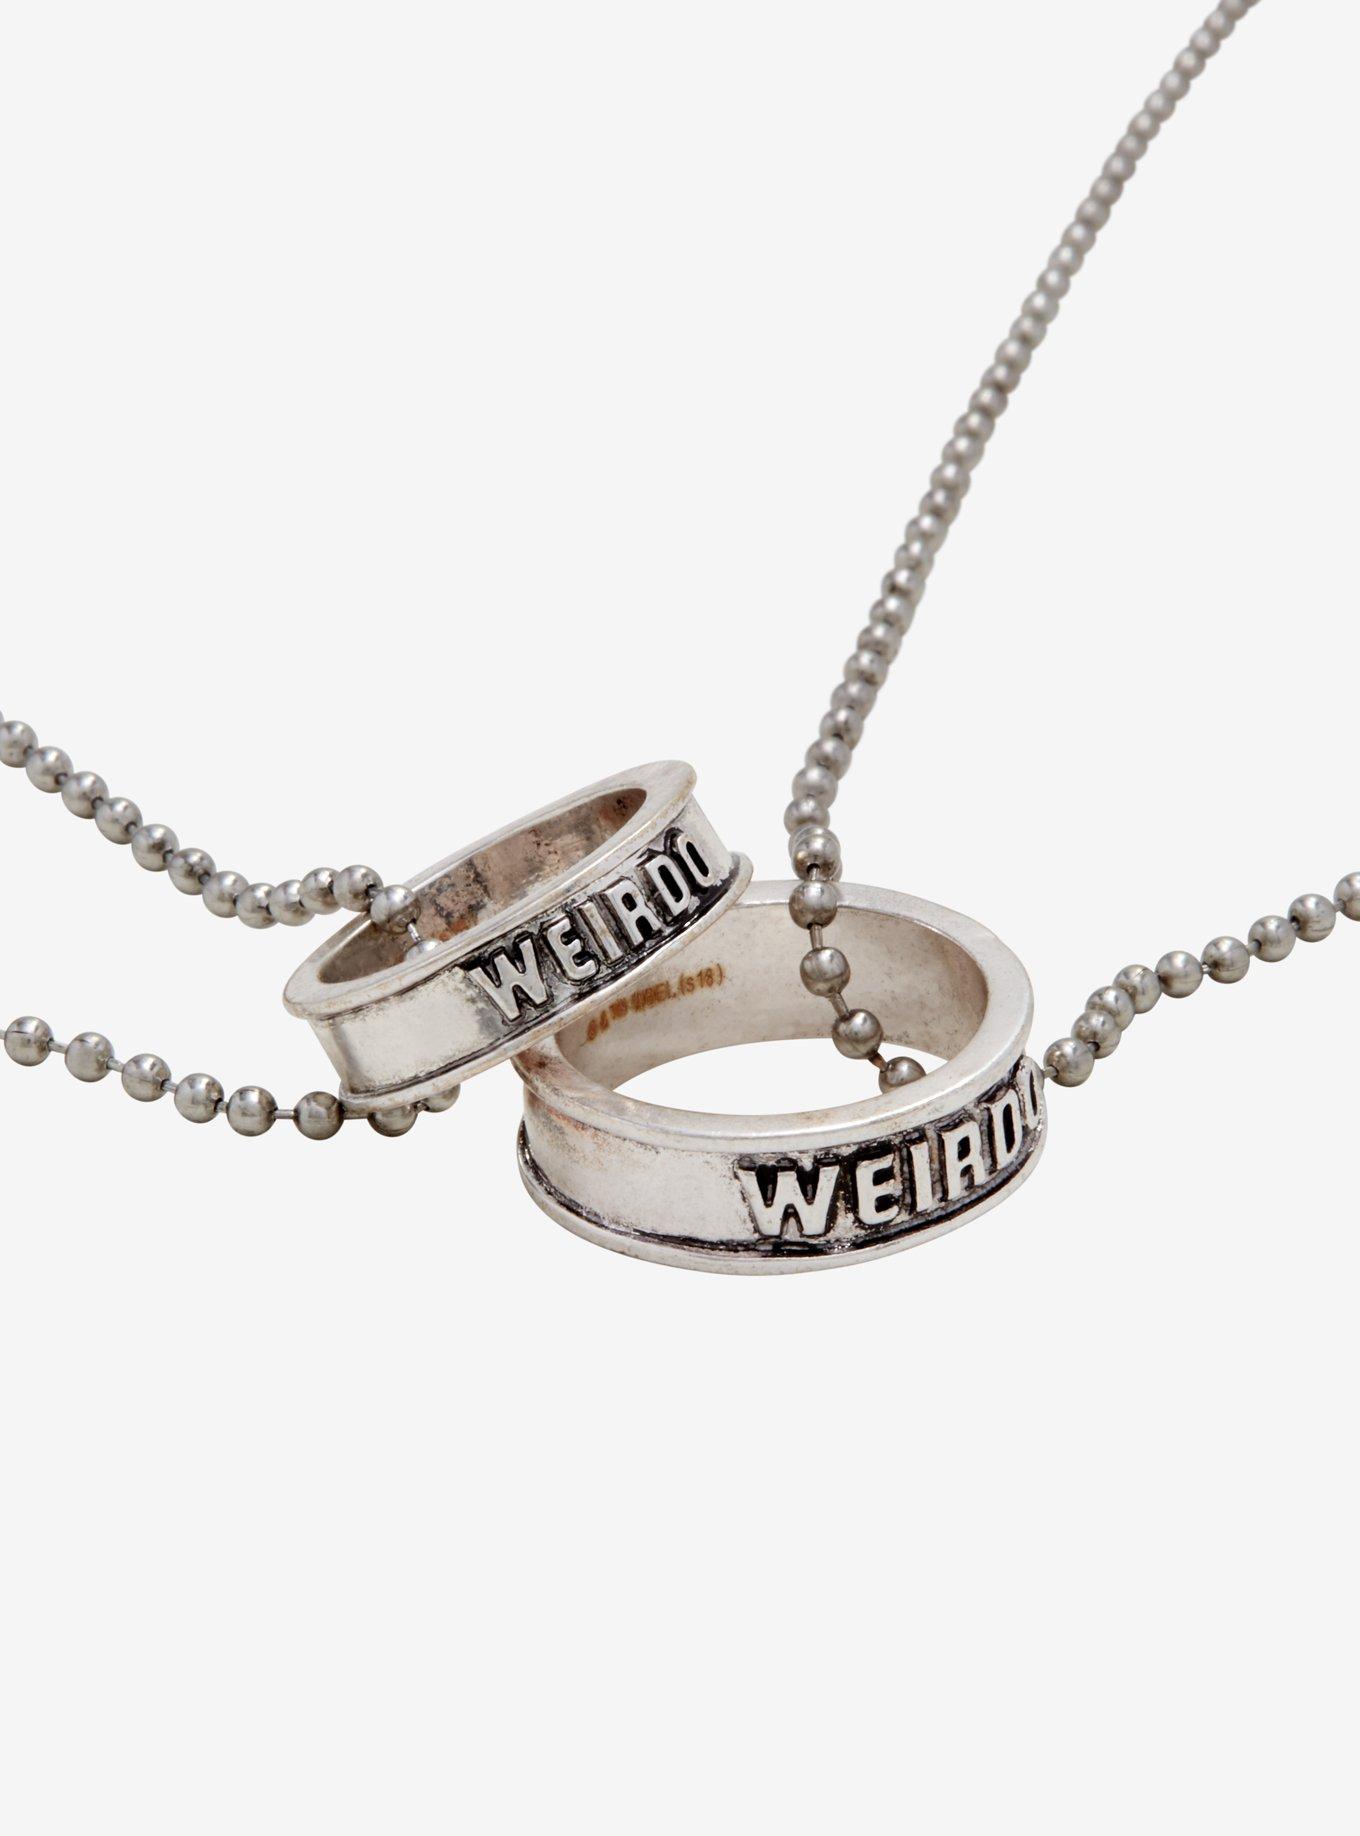 Riverdale Weirdo Best Friend Ring Set Hot Topic Exclusive, , hi-res